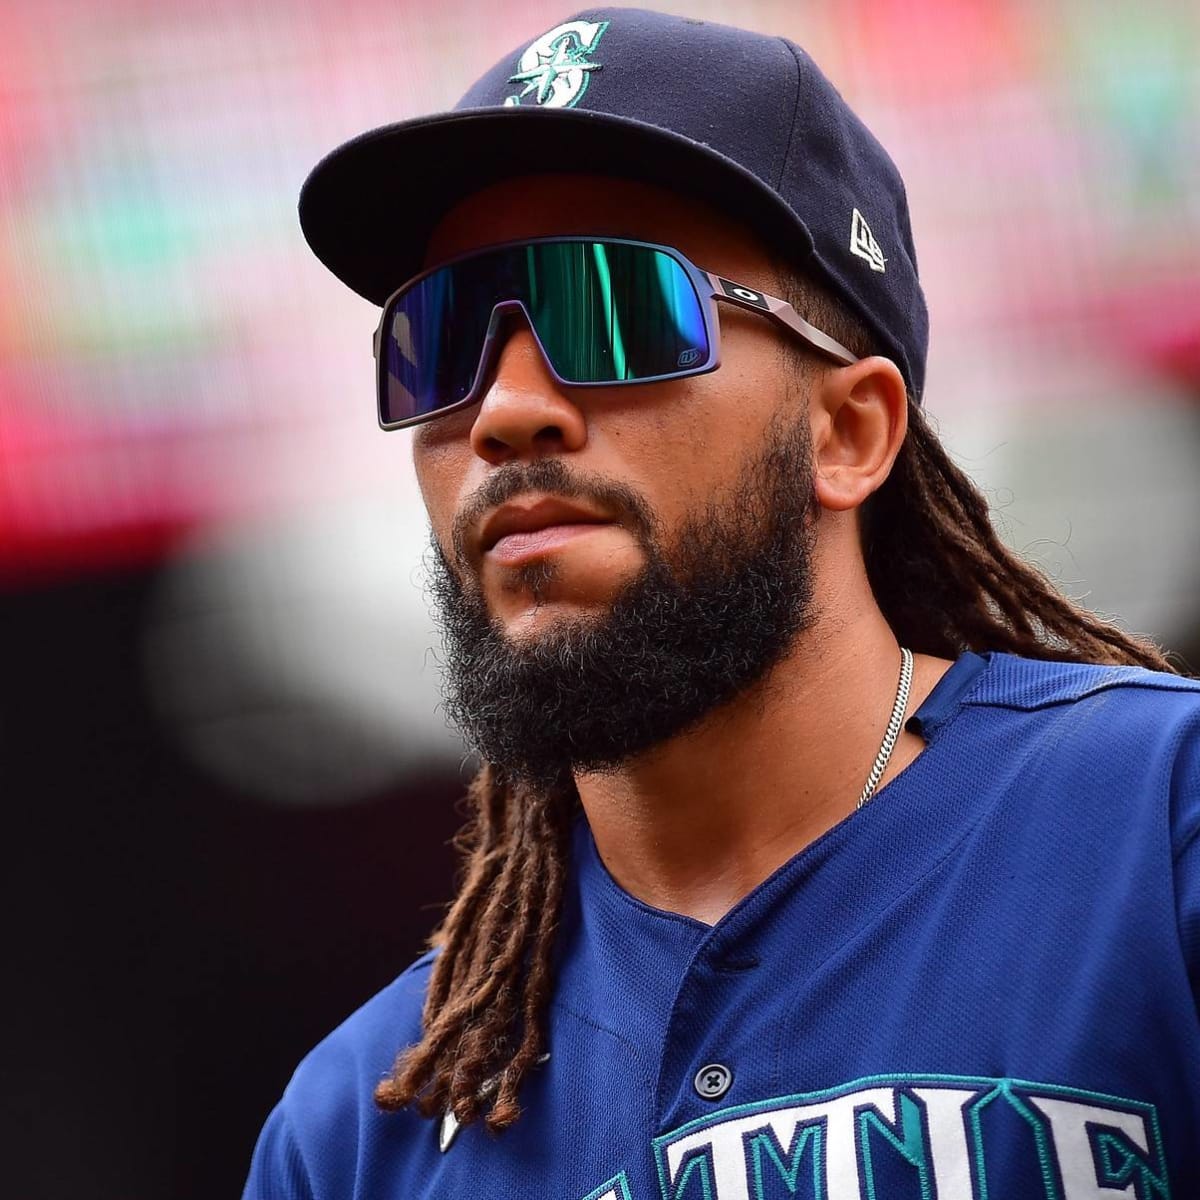 M's players irked at team's plan to sell Jays gear at stadium